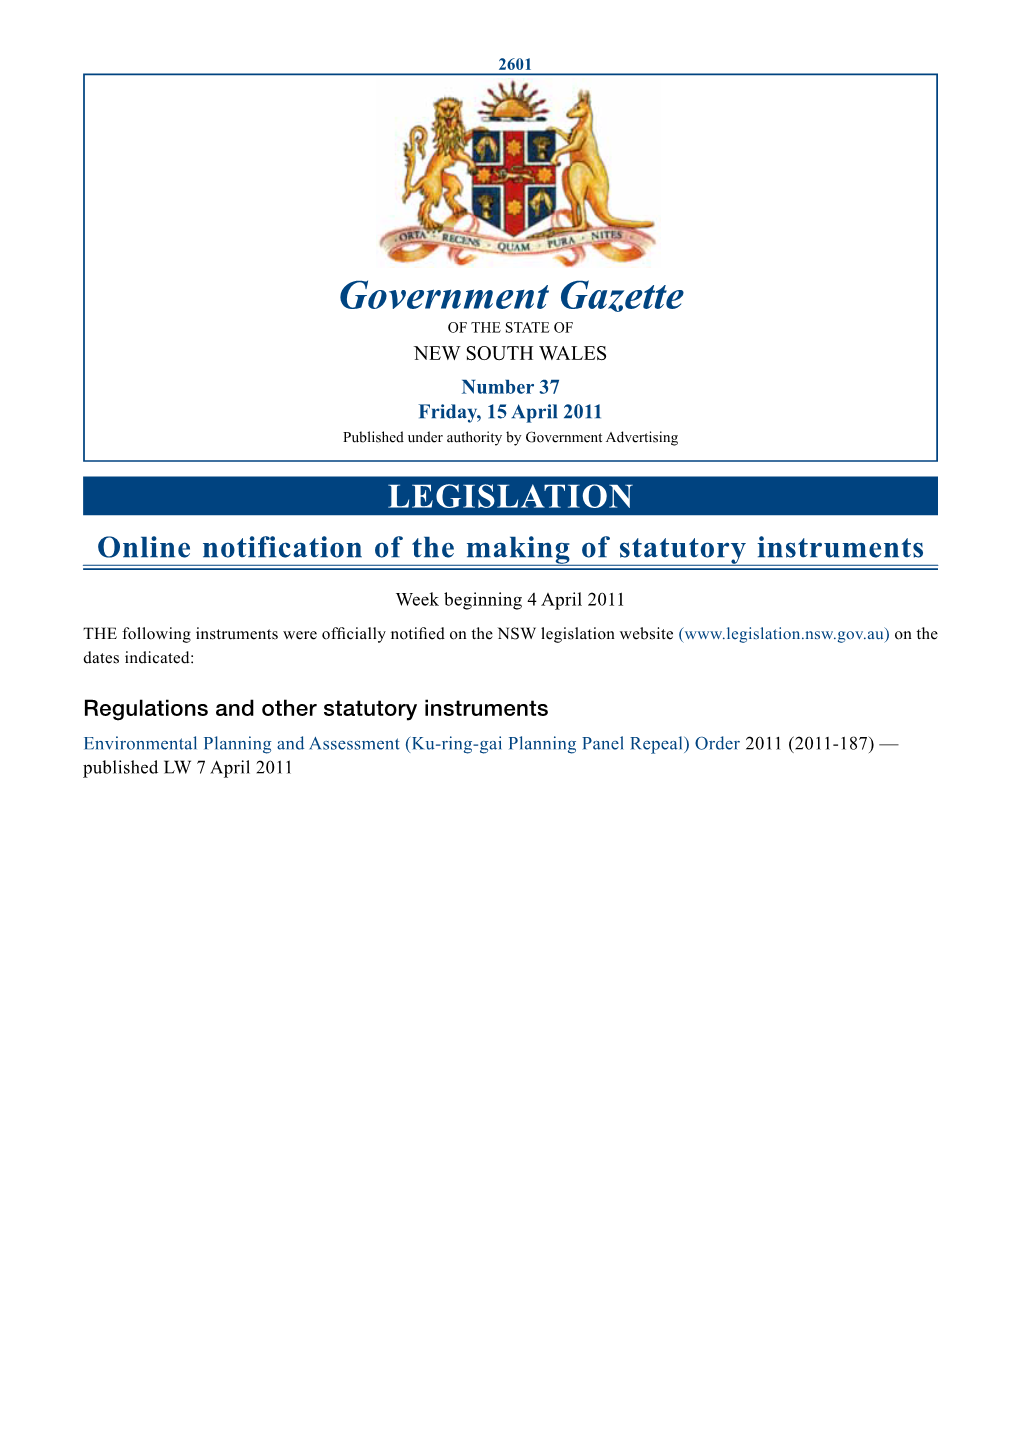 Government Gazette of the STATE of NEW SOUTH WALES Number 37 Friday, 15 April 2011 Published Under Authority by Government Advertising